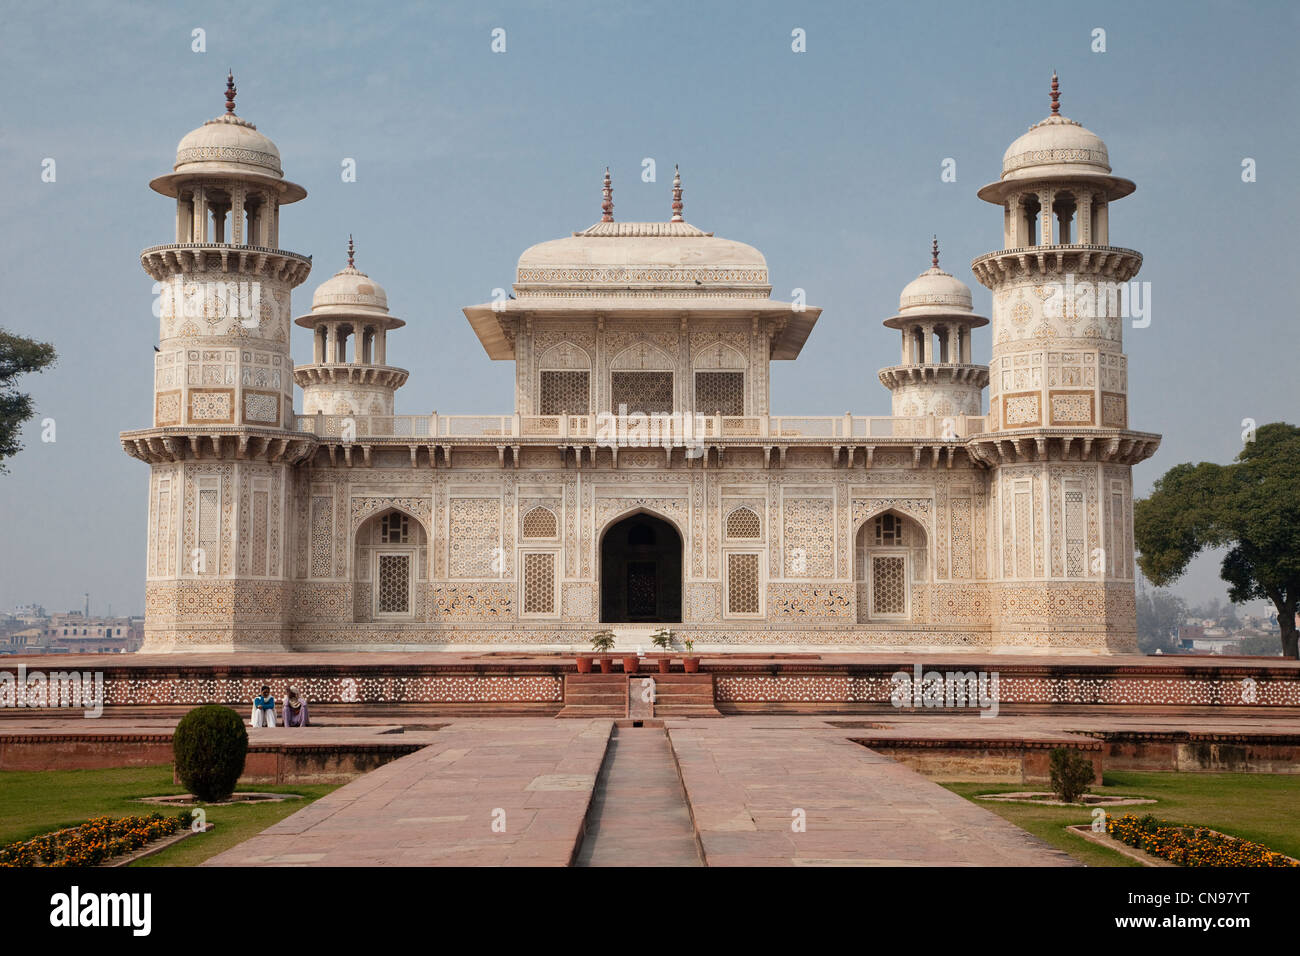 Agra, India. Itimad-ud-Dawlah, Mausoleum of Mirza Ghiyas Beg. The tomb is sometimes referred to as the 'Baby Taj.' Stock Photo